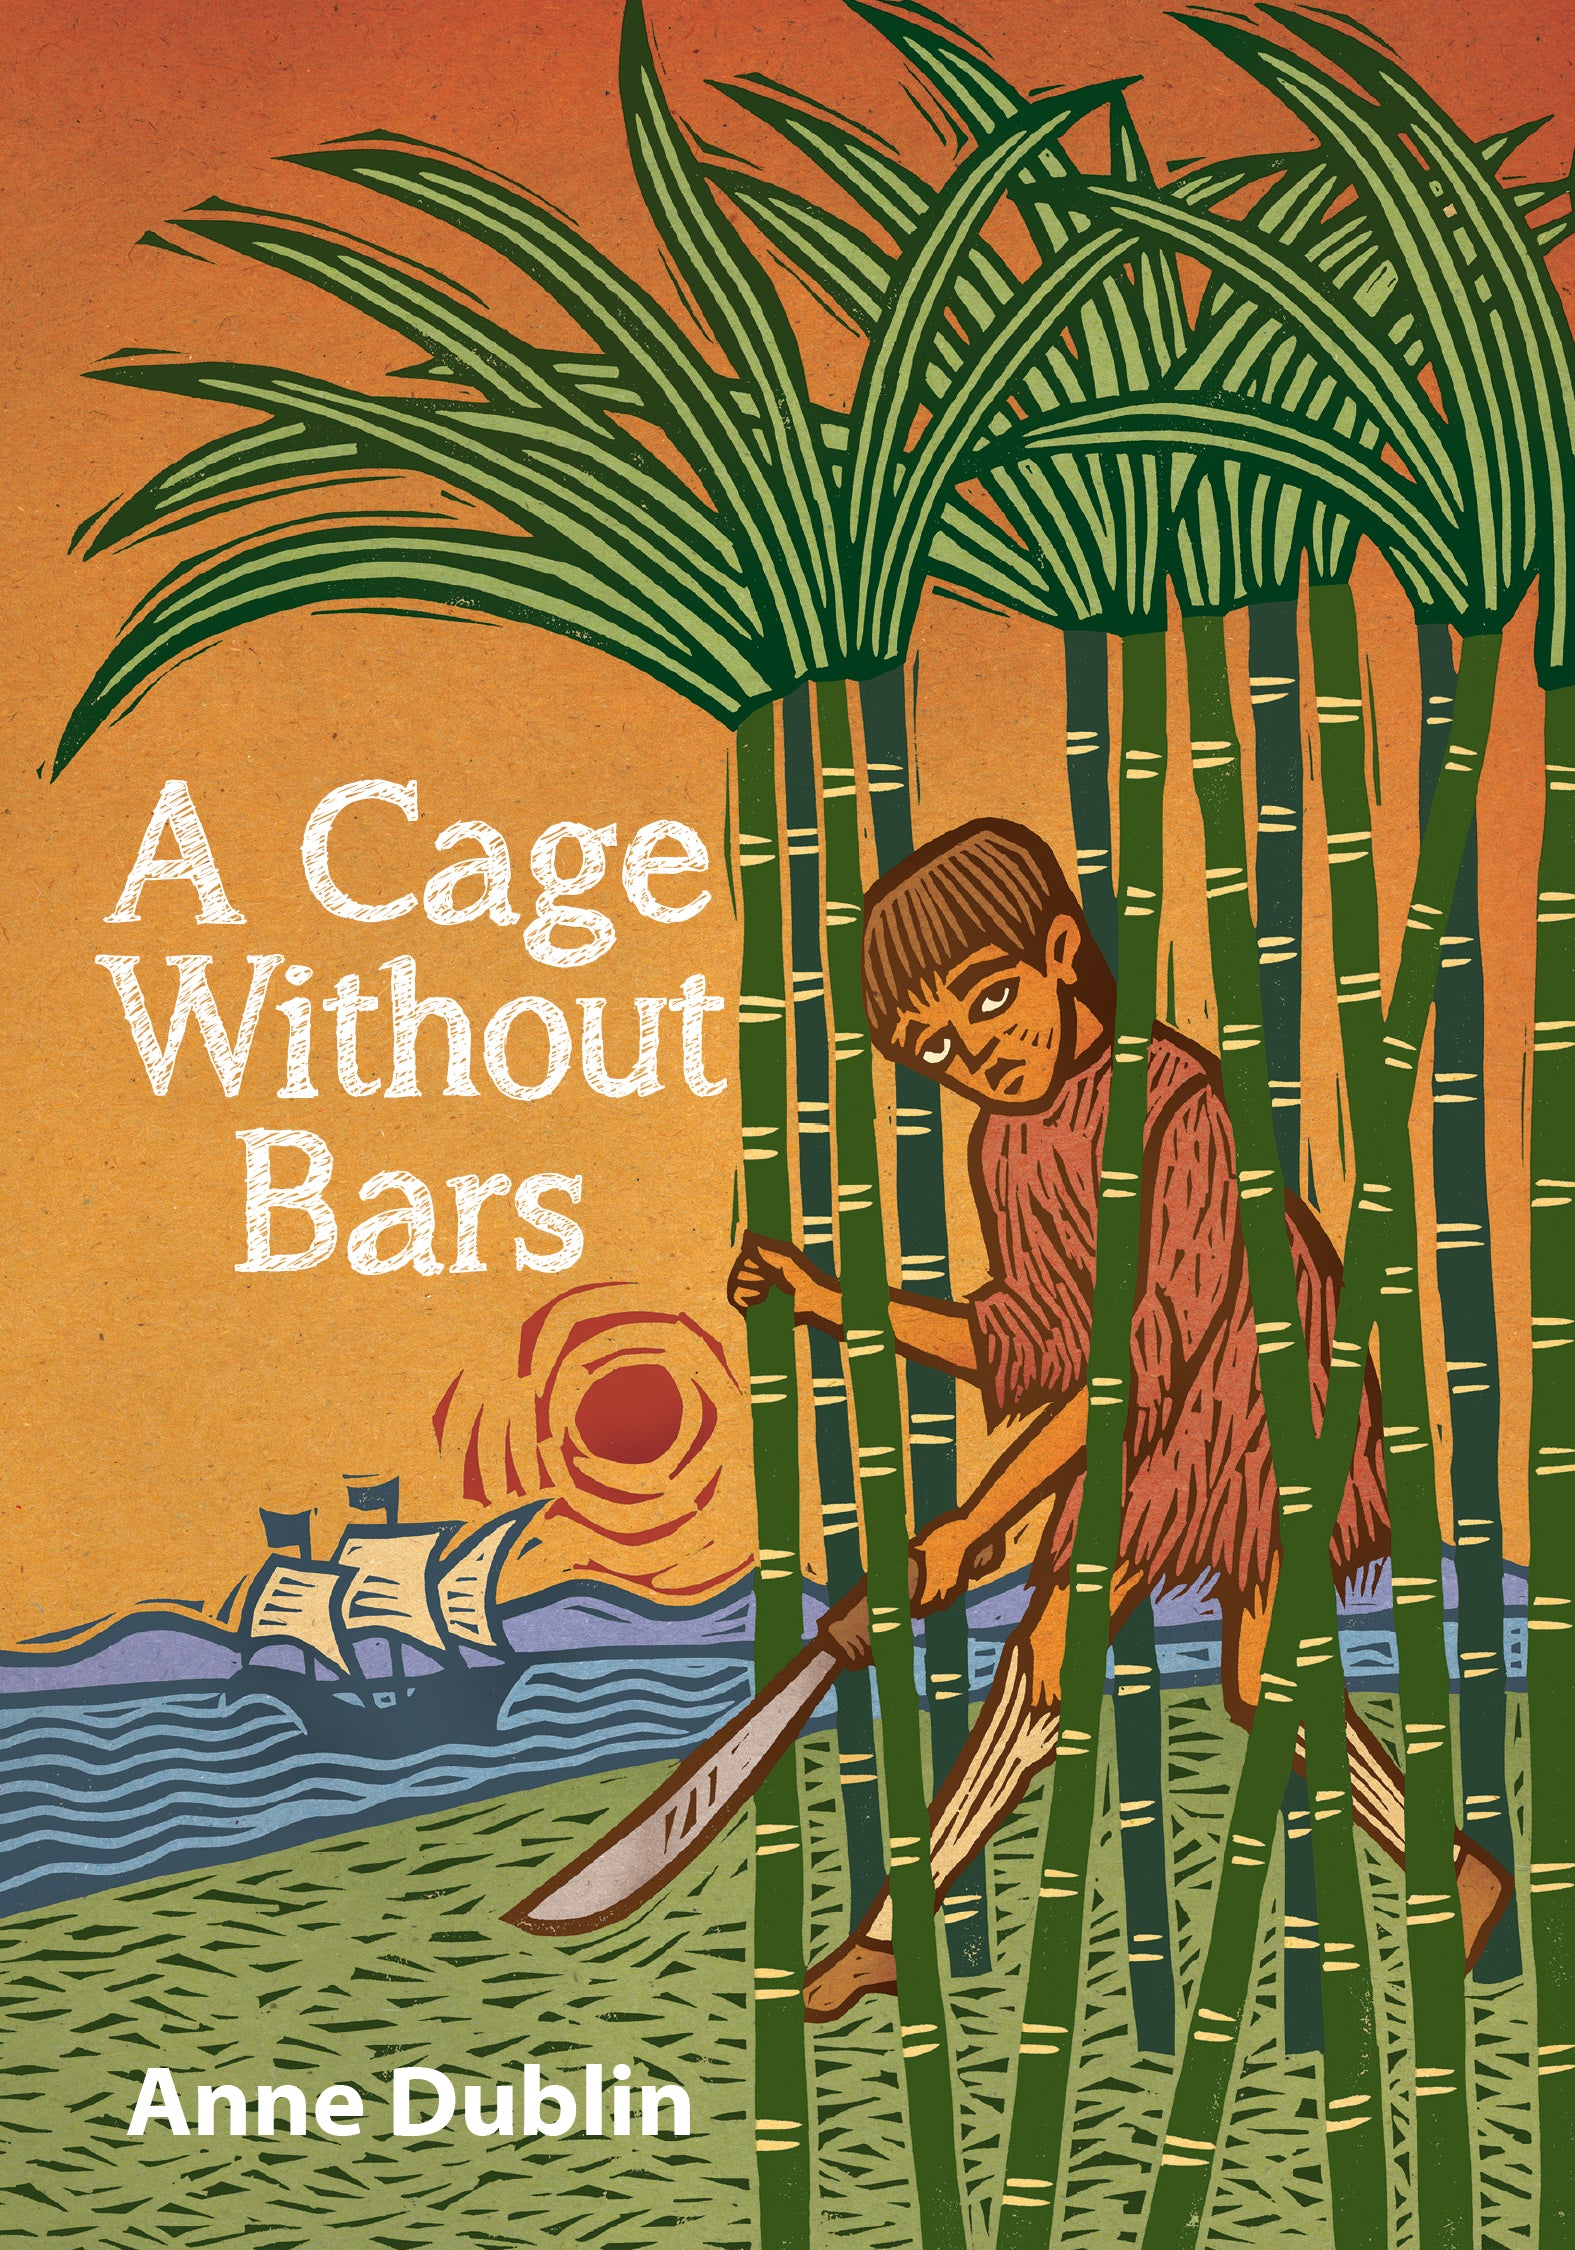 A Cage Without Bars-ebook